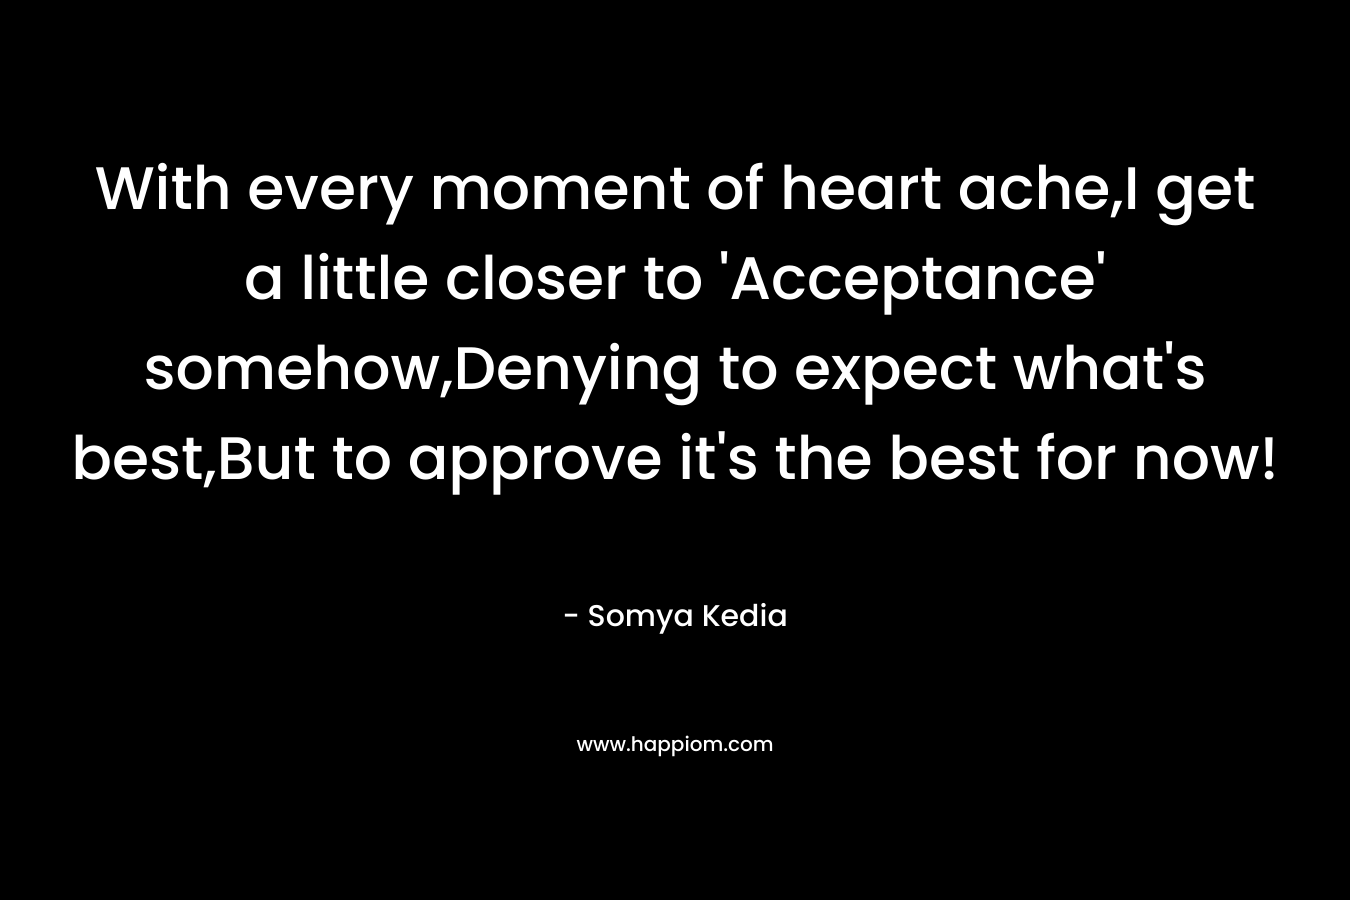 With every moment of heart ache,I get a little closer to ‘Acceptance’ somehow,Denying to expect what’s best,But to approve it’s the best for now! – Somya Kedia